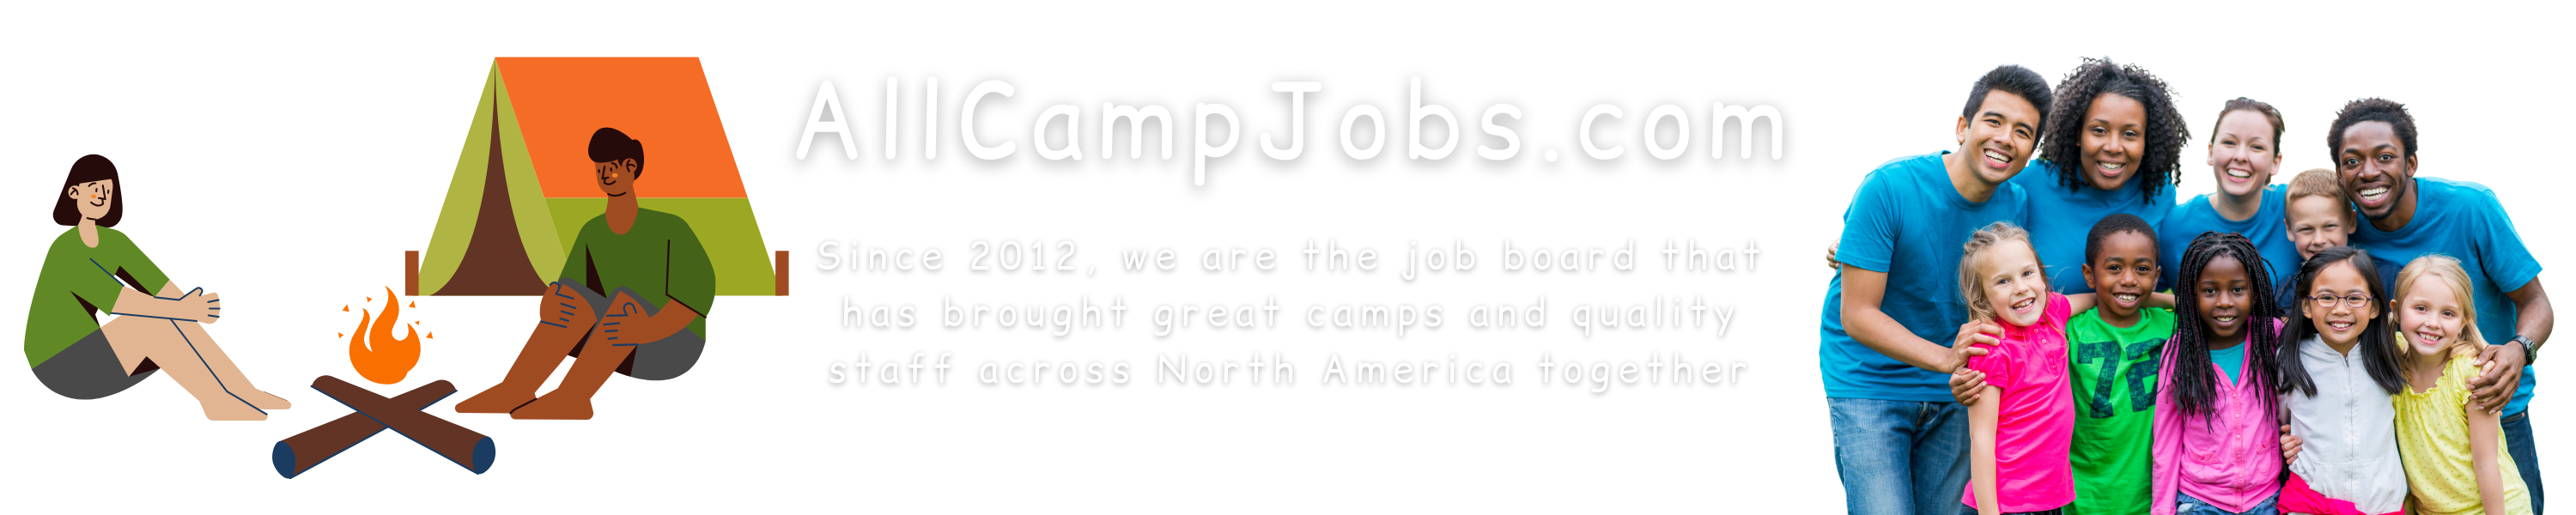 All Camp Jobs, Camp Jobs across the USA and Canada. Jobs for camp staff.